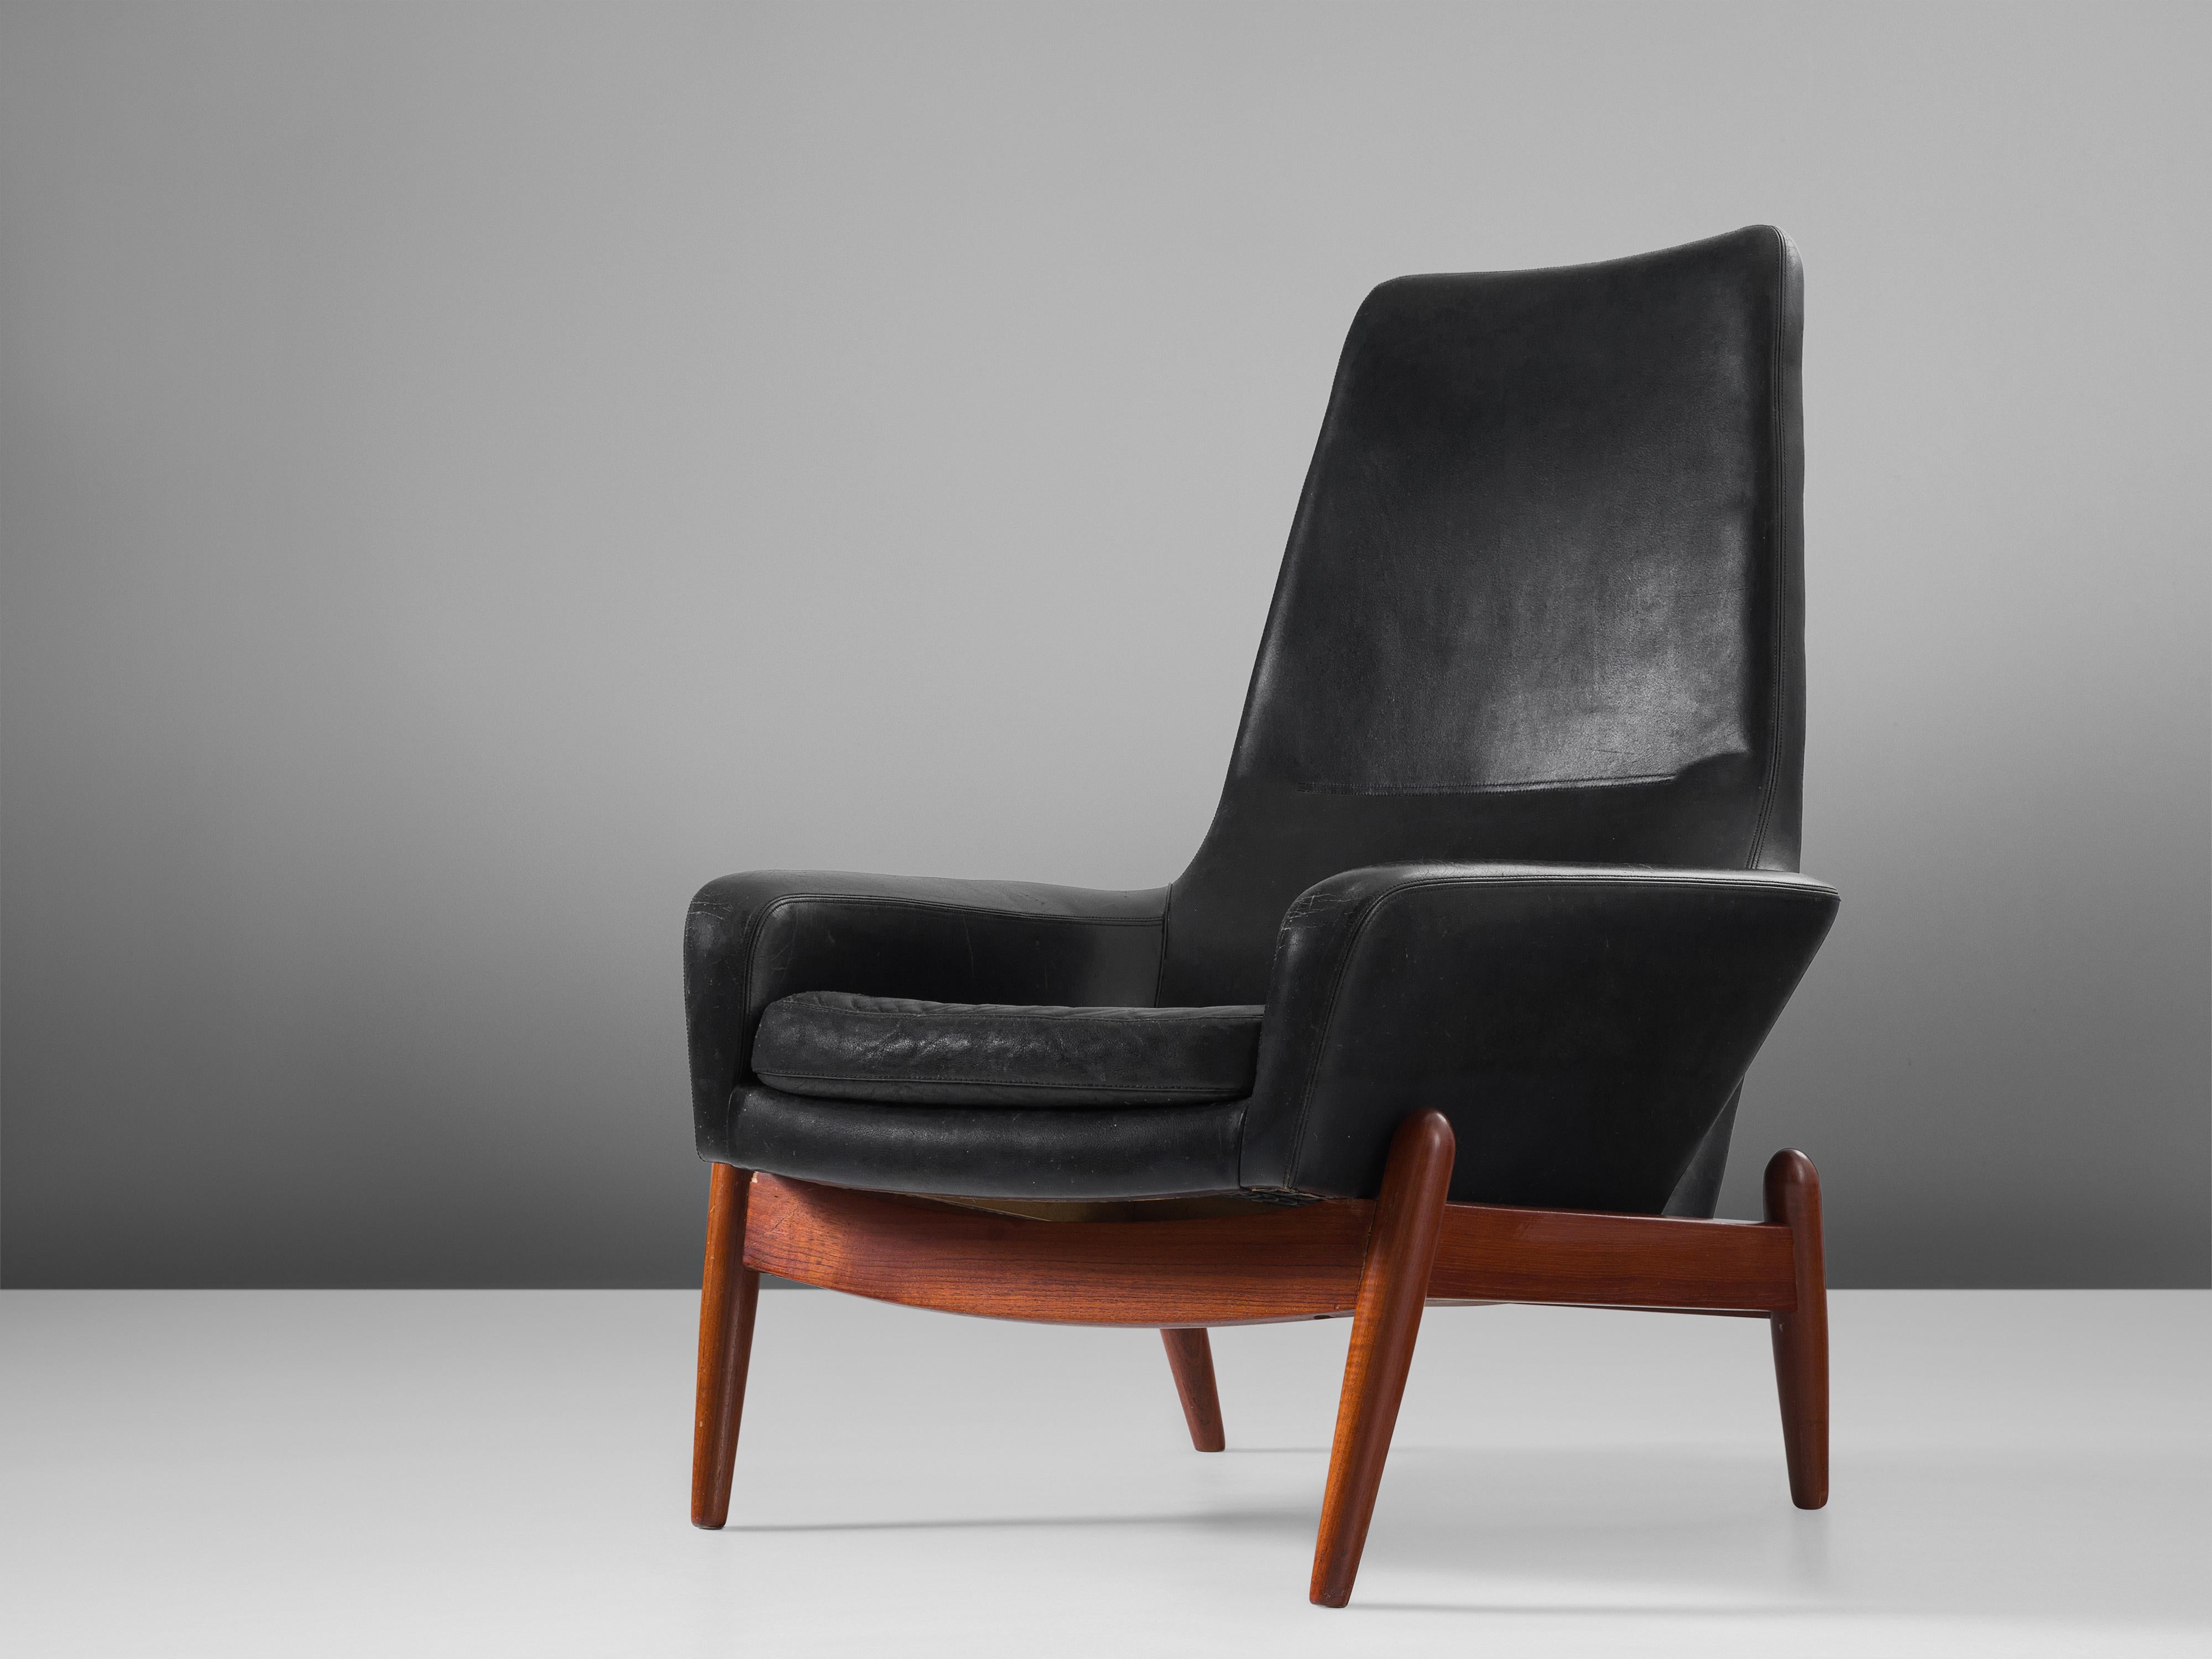 Ib Kofod-Larsen, lounge chair model 'PD30', black leather, teak, Denmark, 1960s.

The designer of this chair, Ib Kofod-Larsen (1921-2003) is known for his distinctive designs features and comfortable materials and simplistic lines, with circular